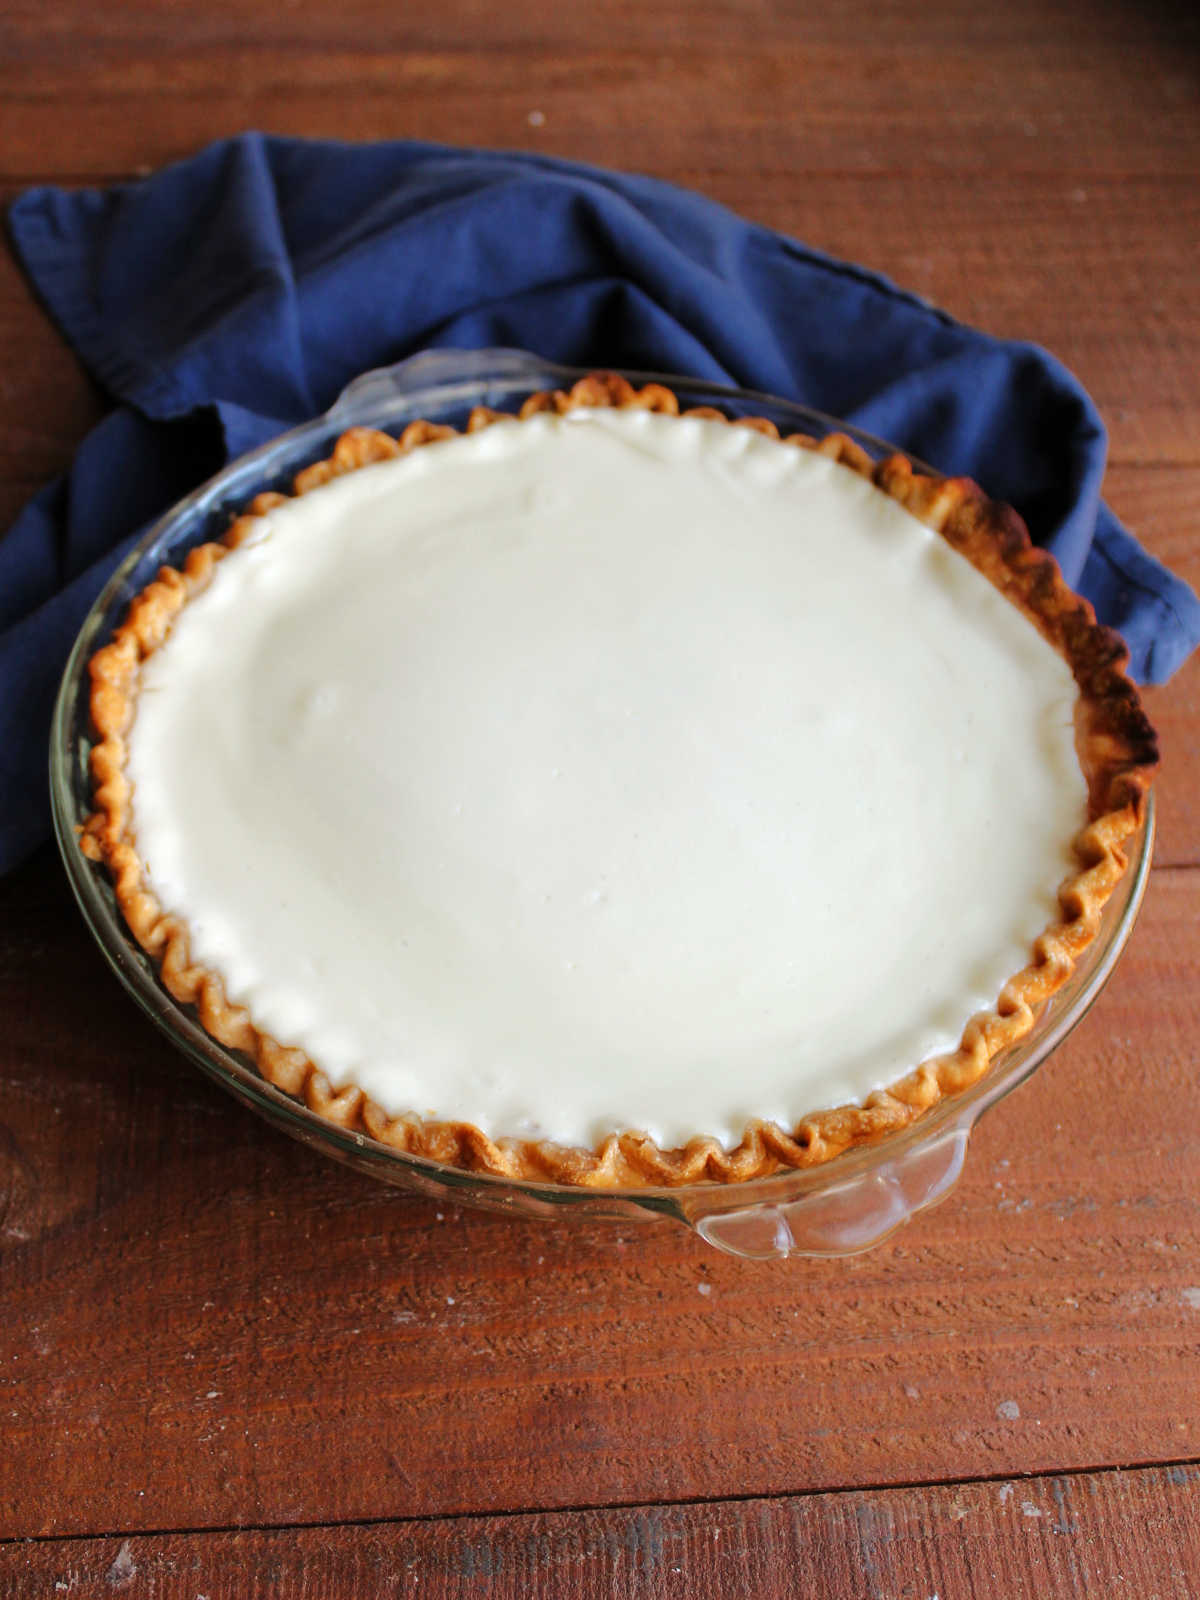 Baked and cooled layered pumpkin pie showing smooth sour cream layer on top.